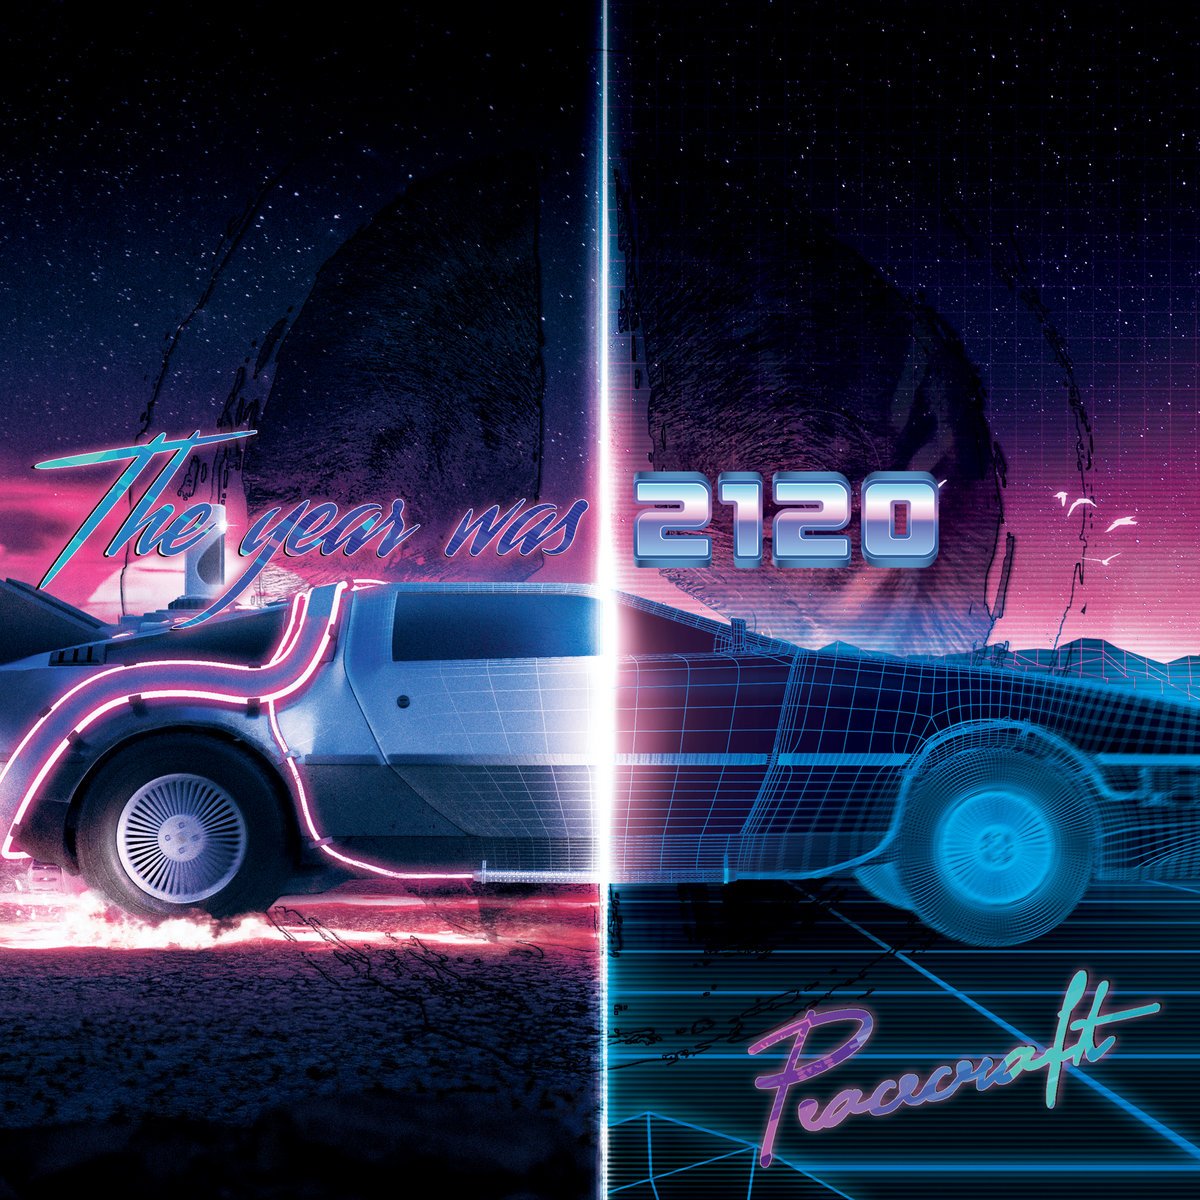 In the distant future of 2120, grab on to what you can and NEVER LET GO, today's pulse-pounding #synthwaveultra pick by @DJPeacecraft! open.spotify.com/track/6aEuk0O8… peacecraftmusic.bandcamp.com/album/the-year… Follow for more #synthwave I: open.spotify.com/playlist/7AuUa… II: open.spotify.com/playlist/2pziB…